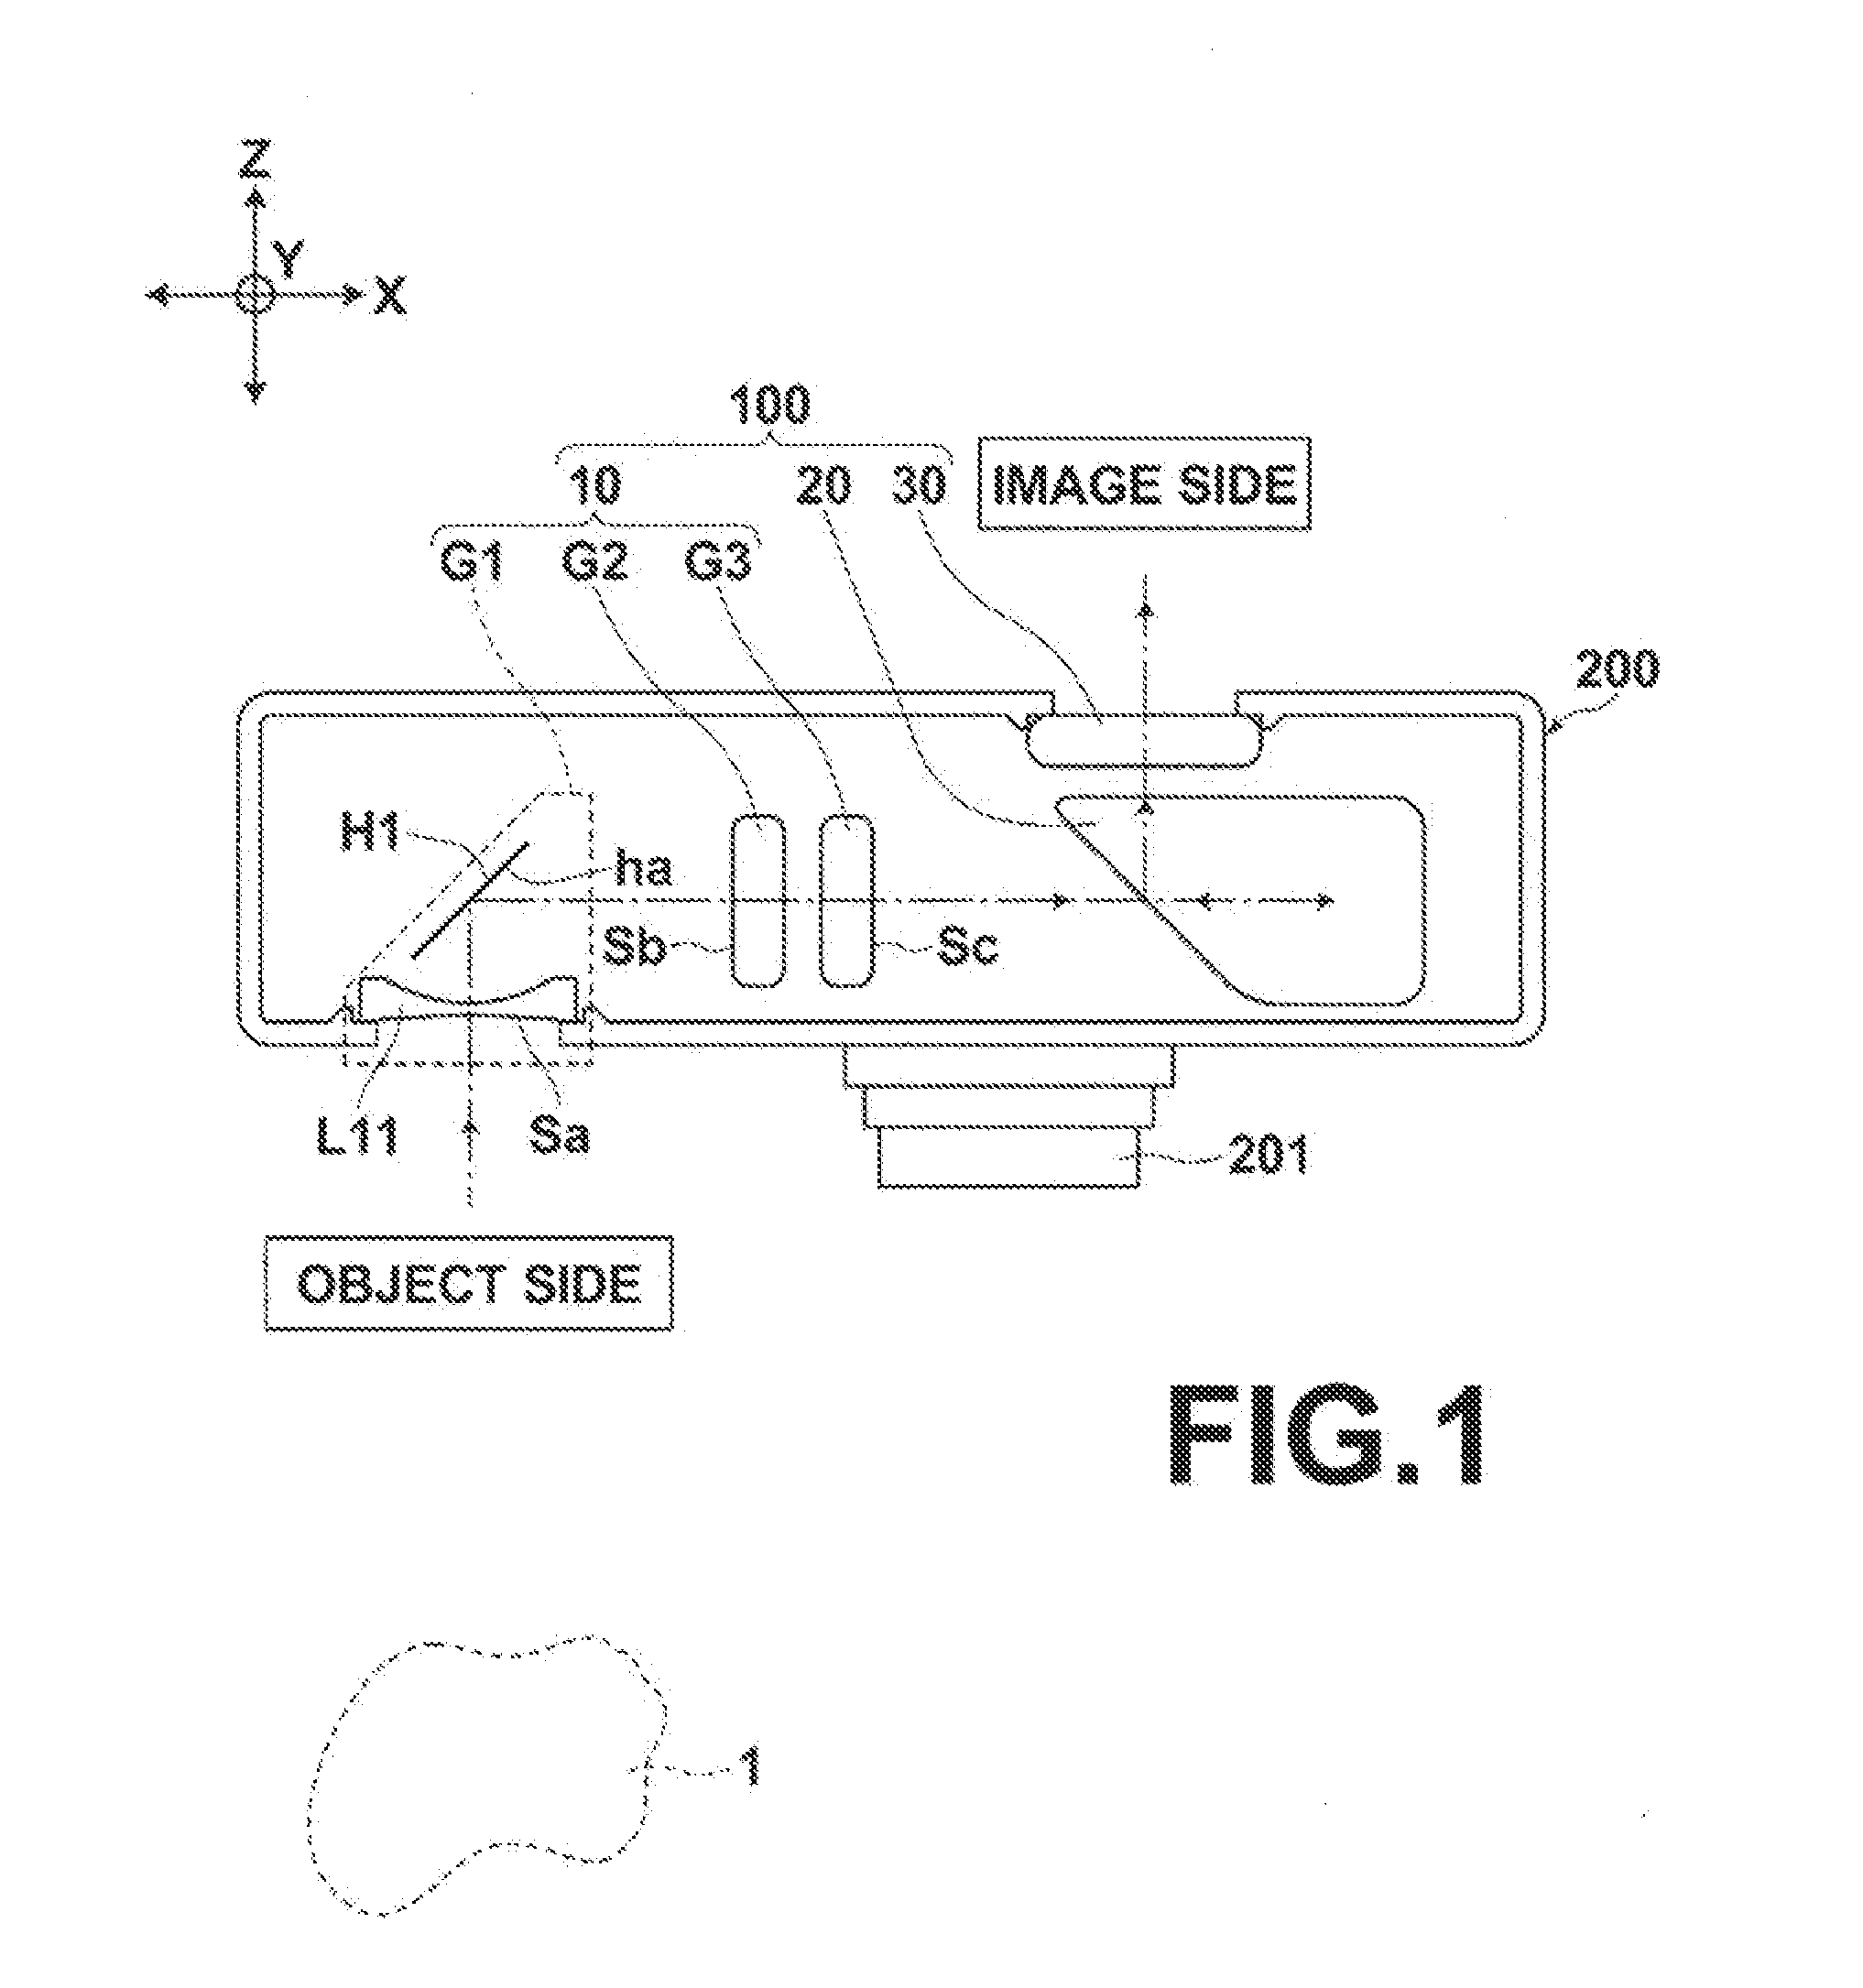 Real-image zoom viewfinder and imaging apparatus